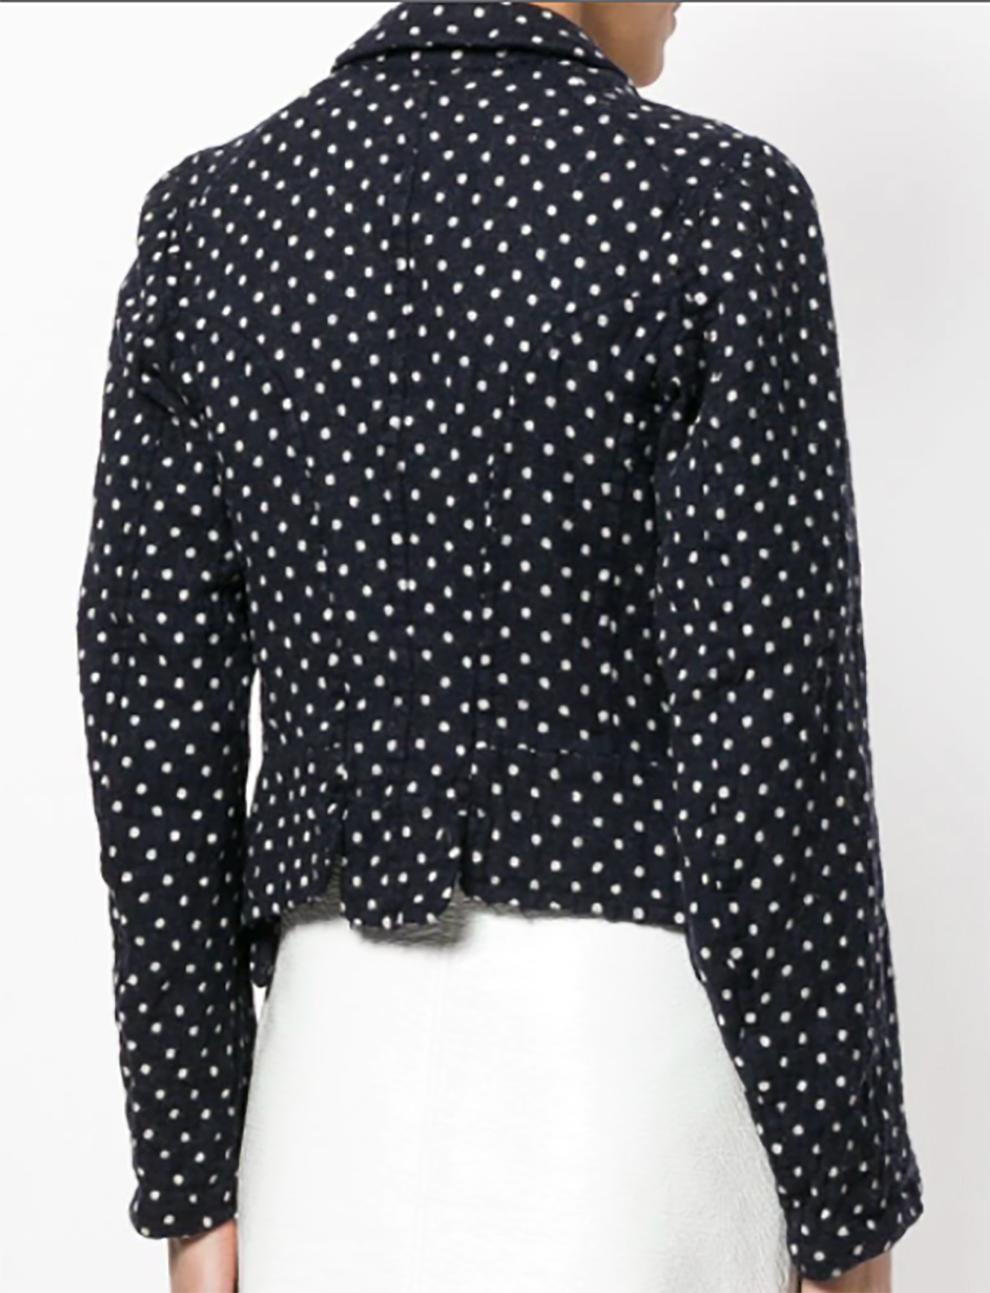 Comme Des Garçons black wool polka dots fitted jacket featuring a curvy silhouette, notched lapels, a front button fastening, long sleeves and a cropped length.
In excellent vintage condition. Made in Japan.
Estimated size: S
100% wool
We guarantee